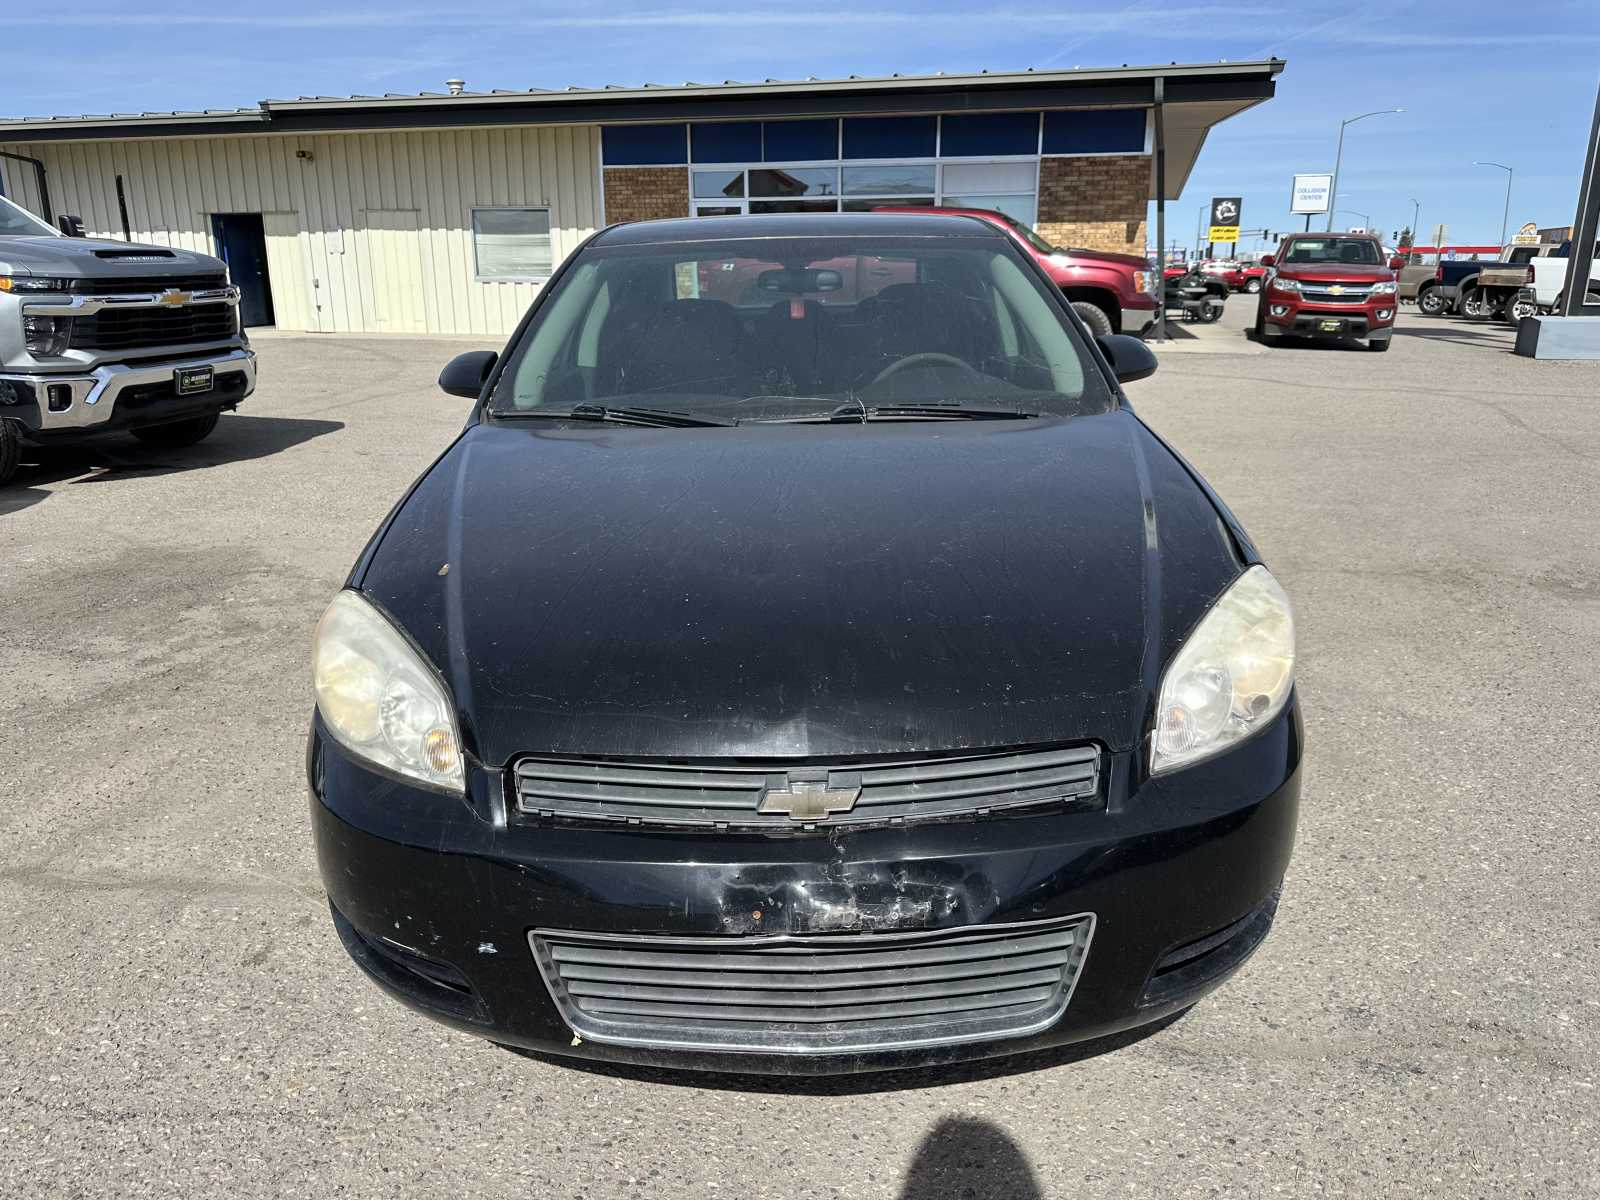 Used 2009 Chevrolet Impala LT with VIN 2G1WT57N391200896 for sale in Dillon, MT